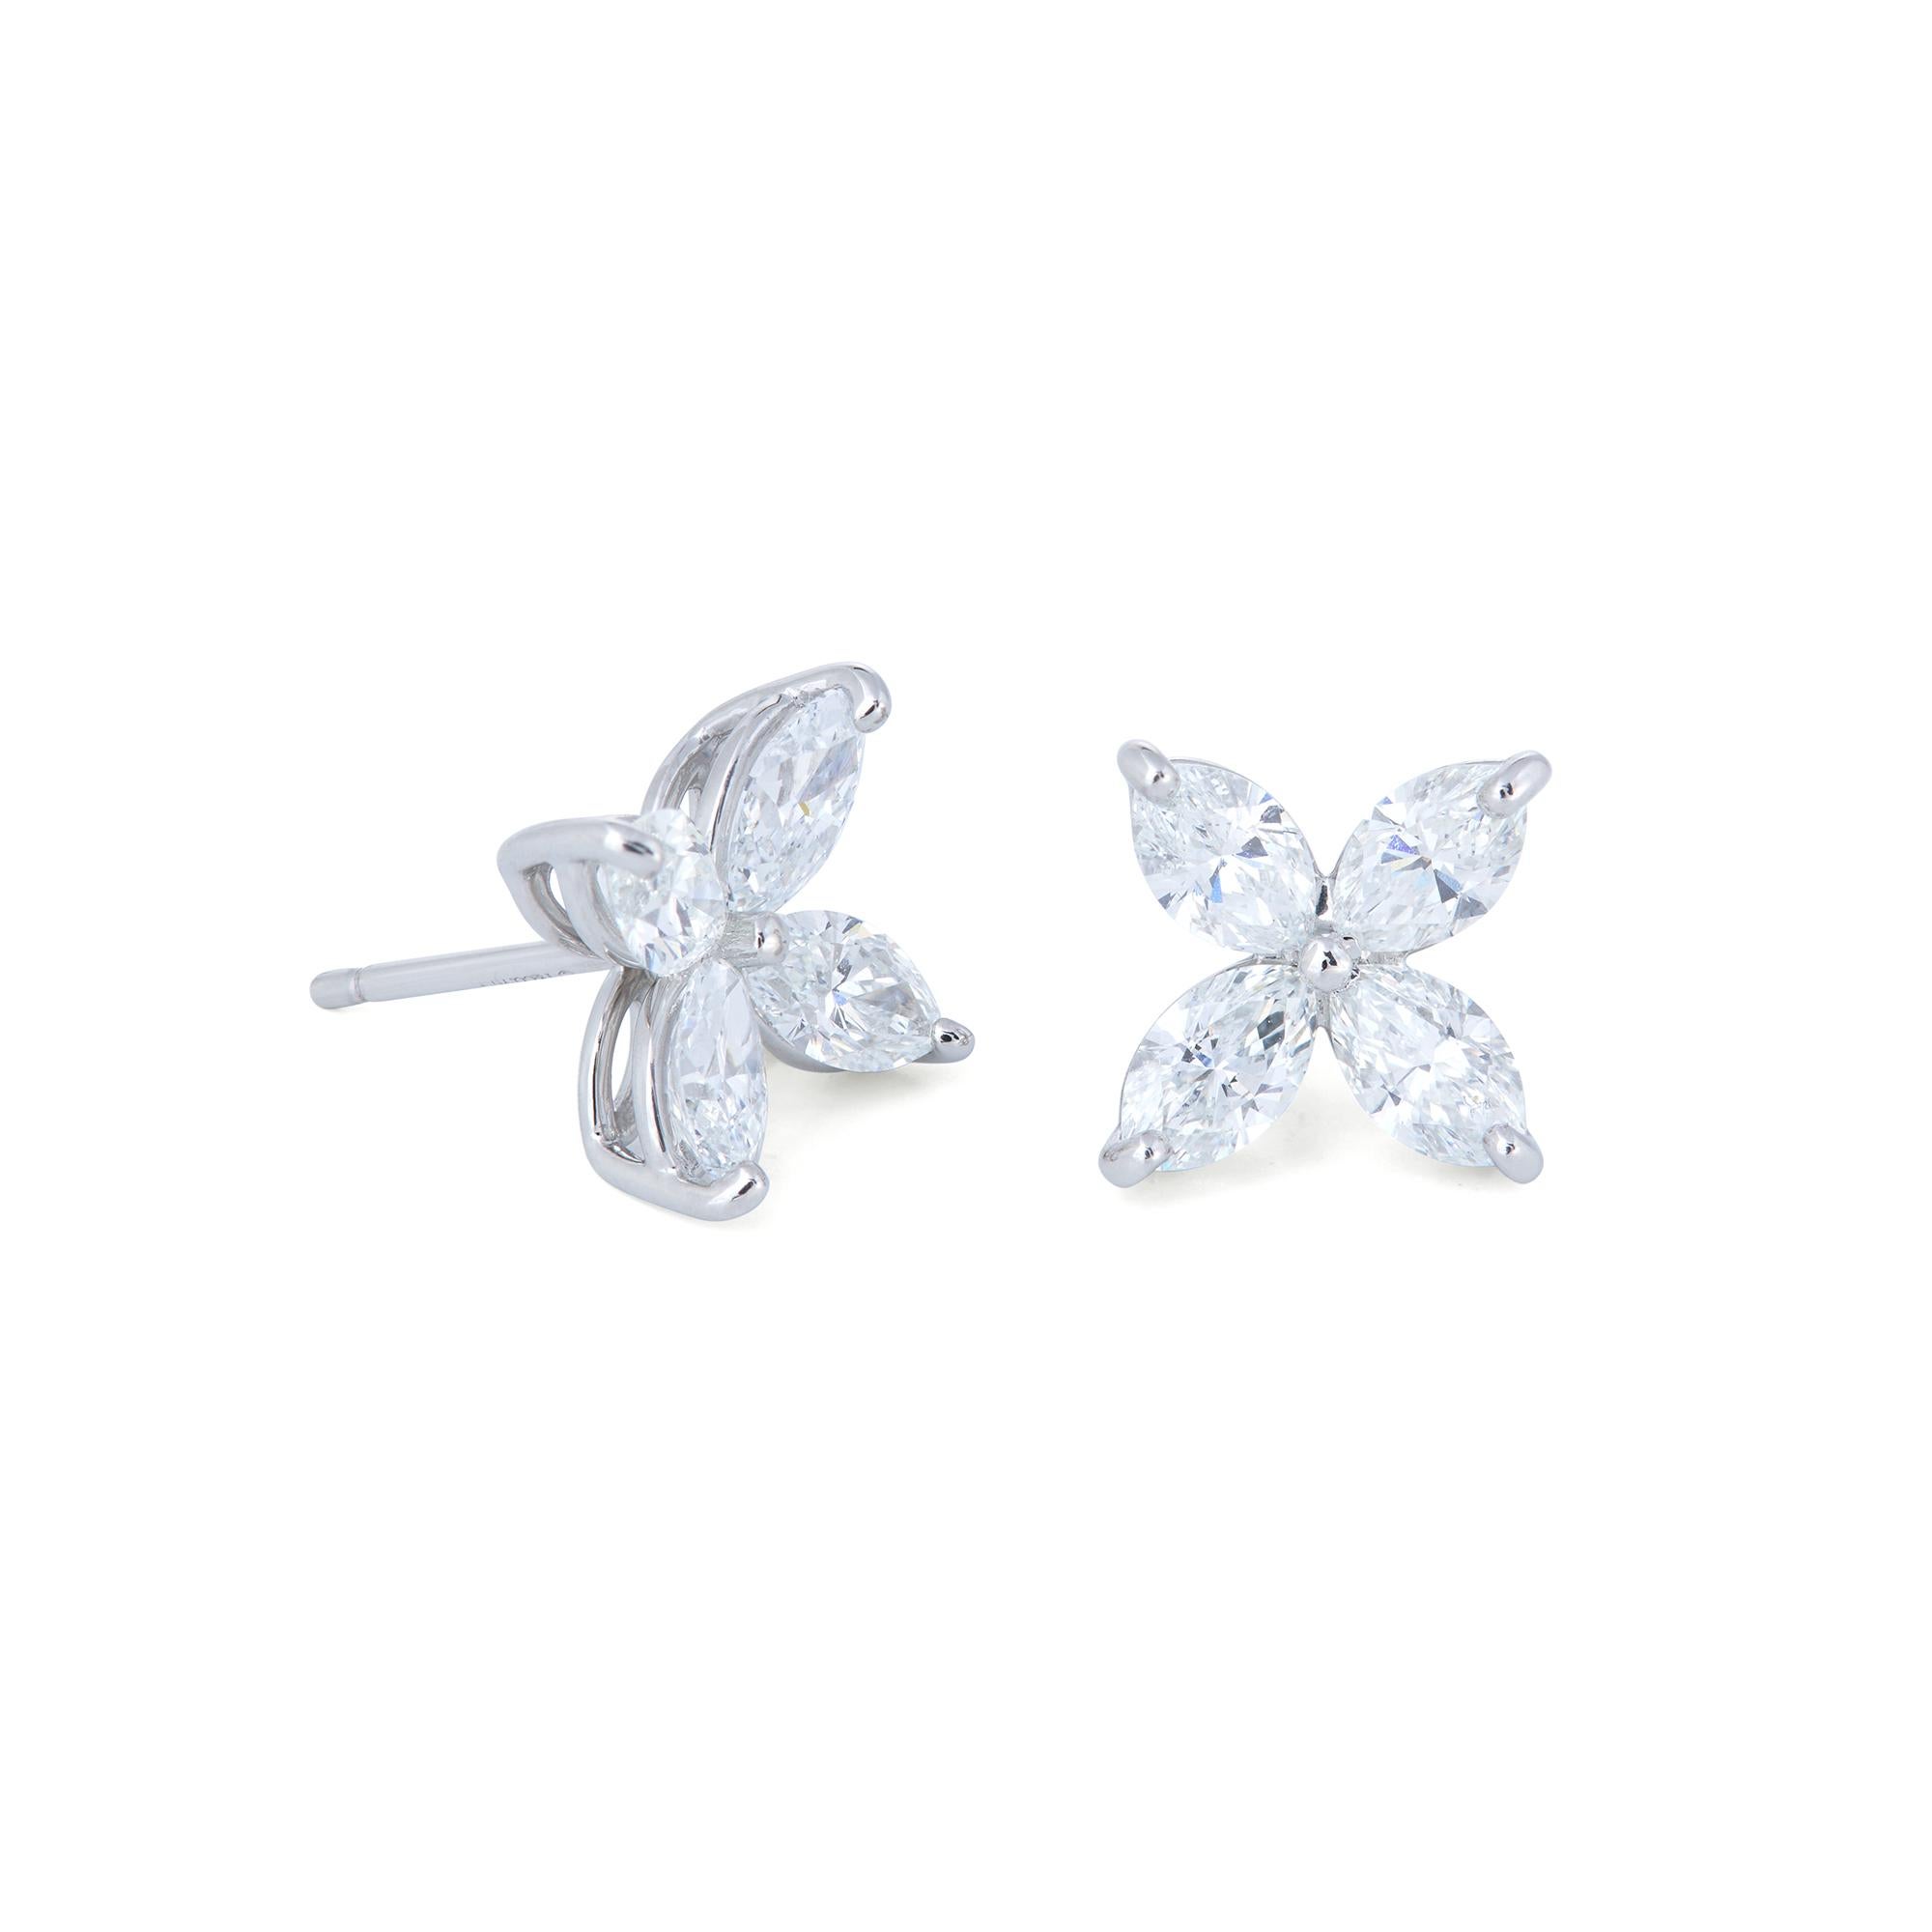 Authentic Tiffany & Co. 'Victoria' earrings crafted in platinum and set with sparkling marquise-shaped diamonds (E-F color, VS clarity) weighing an estimated 1.62 carats total weight. Signed Tiffany & Co., PT 950. The earrings are presented with the